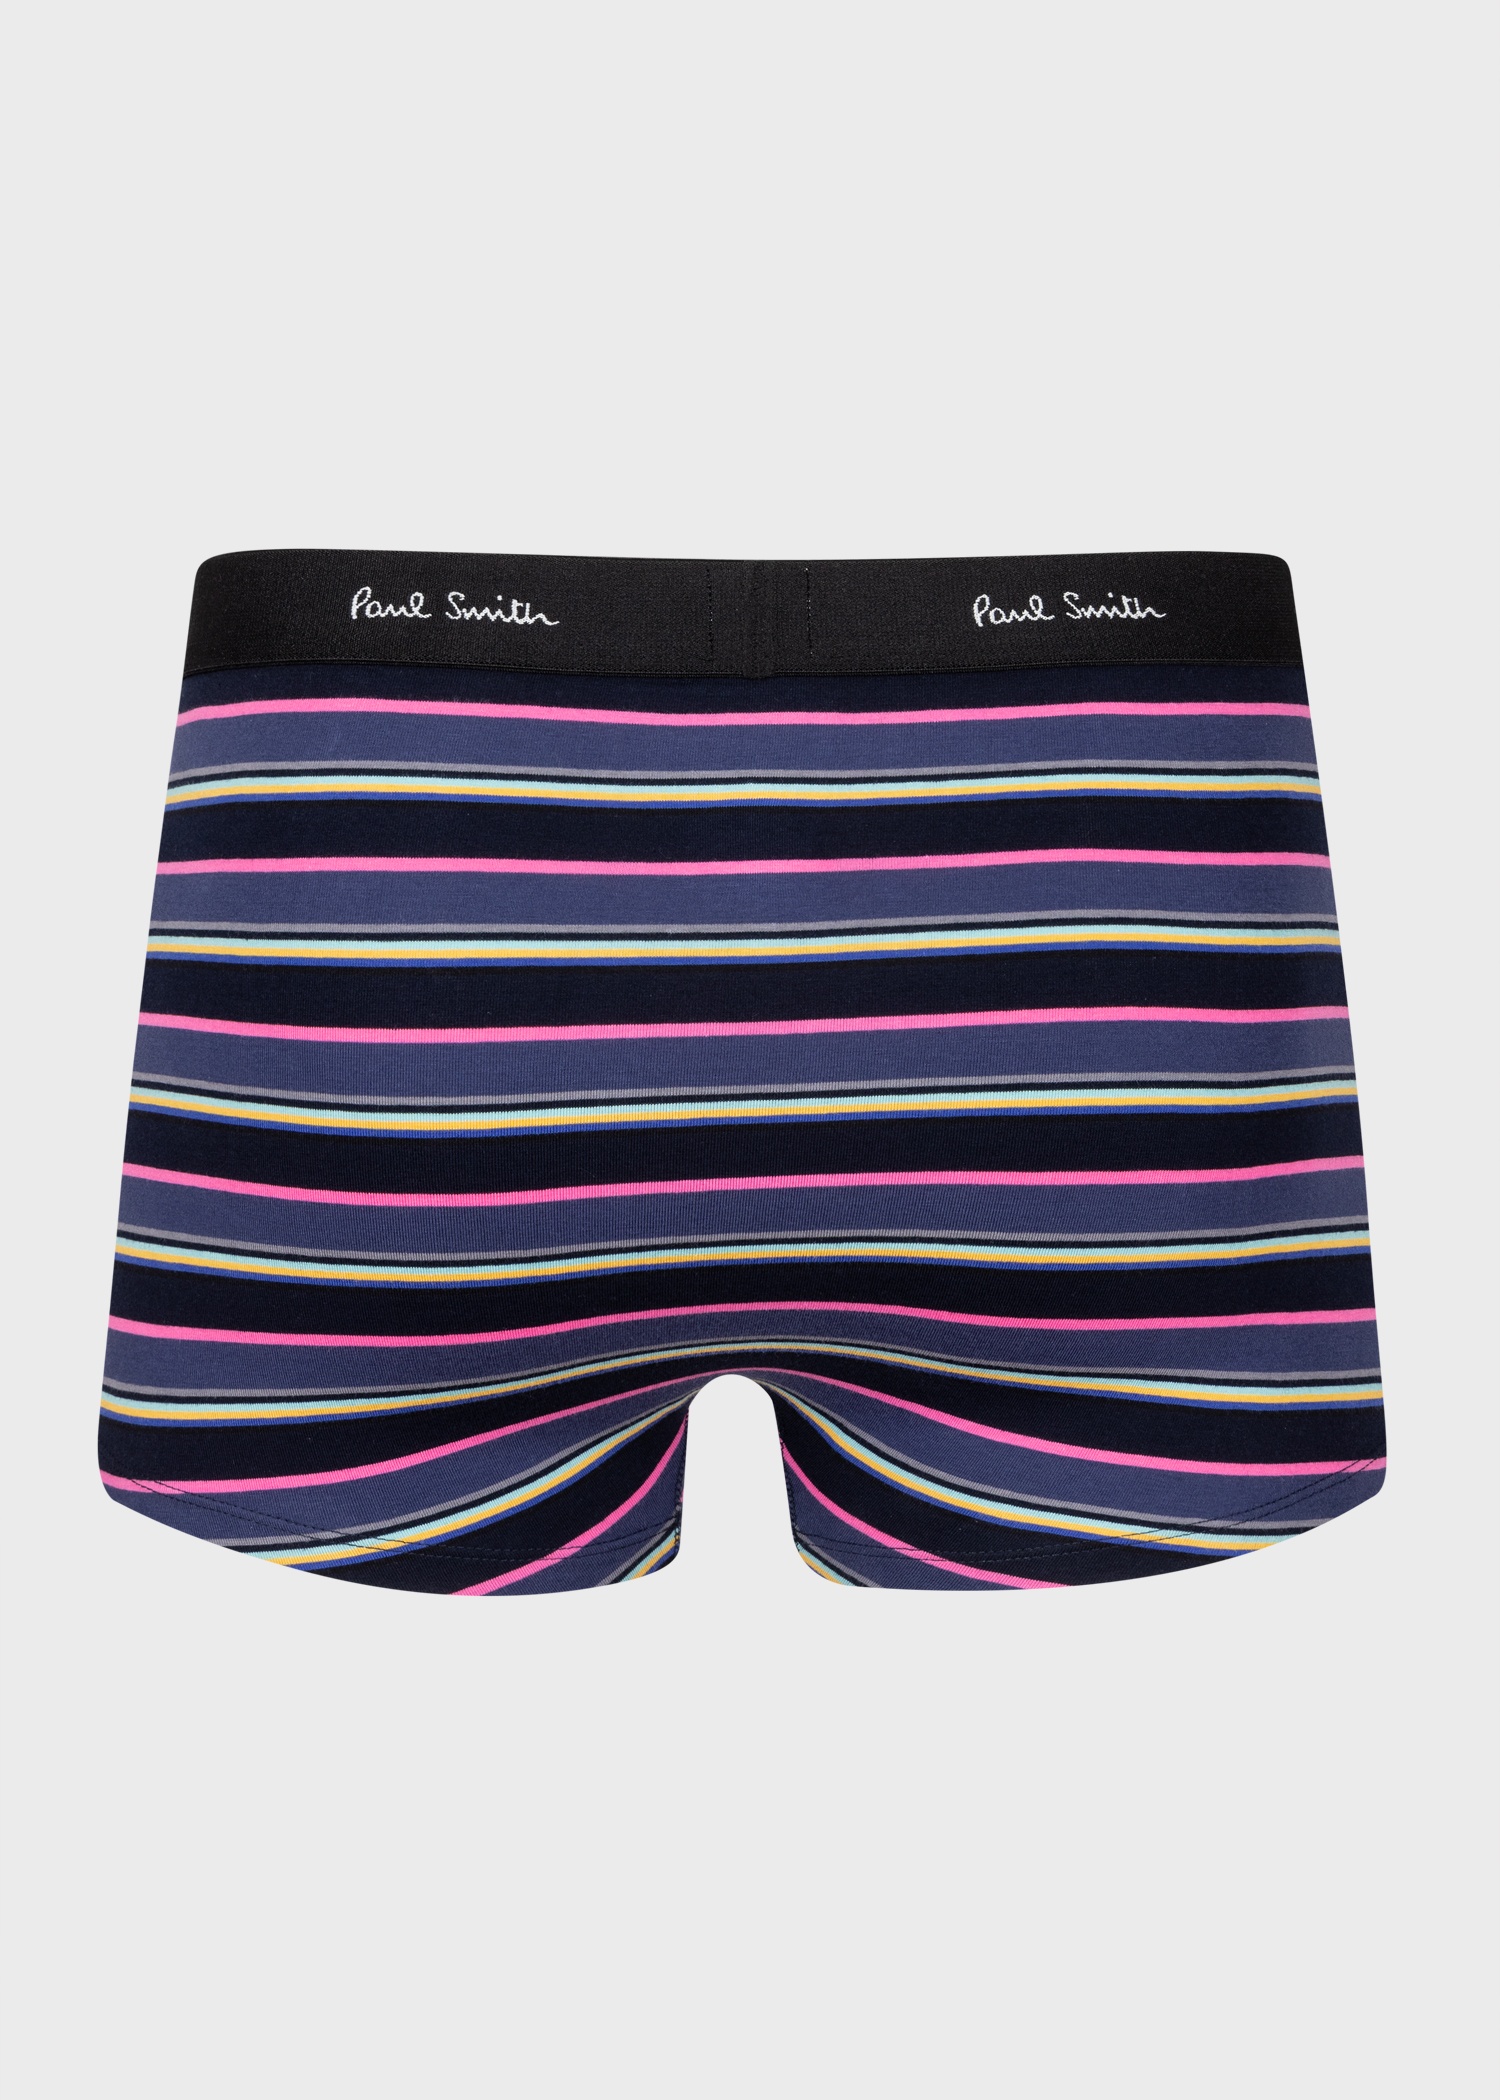 Blue And Pink Stripe Boxer Briefs - 2